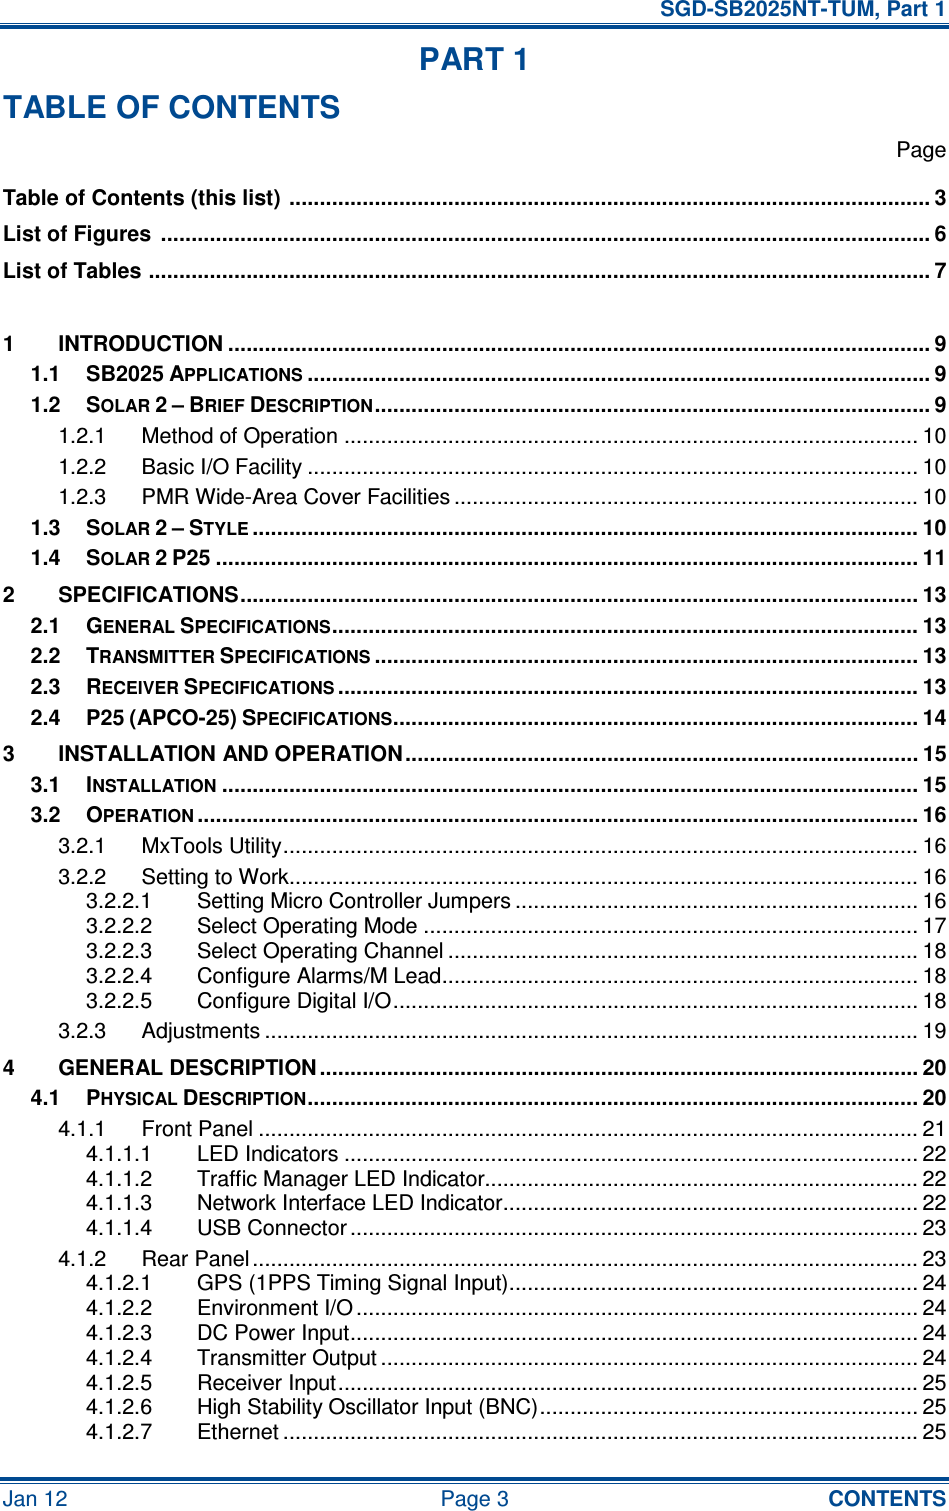   SGD-SB2025NT-TUM, Part 1 Jan 12  Page 3  CONTENTS PART 1 TABLE OF CONTENTS   Page Table of Contents (this list)  ......................................................................................................... 3 List of Figures  .............................................................................................................................. 6 List of Tables ................................................................................................................................ 7  1 INTRODUCTION ................................................................................................................... 9 1.1 SB2025 APPLICATIONS...................................................................................................... 9 1.2 SOLAR 2 – BRIEF DESCRIPTION........................................................................................... 9 1.2.1 Method of Operation .............................................................................................. 10 1.2.2 Basic I/O Facility .................................................................................................... 10 1.2.3 PMR Wide-Area Cover Facilities ............................................................................ 10 1.3 SOLAR 2 – STYLE............................................................................................................. 10 1.4 SOLAR 2 P25 ................................................................................................................... 11 2 SPECIFICATIONS............................................................................................................... 13 2.1 GENERAL SPECIFICATIONS................................................................................................ 13 2.2 TRANSMITTER SPECIFICATIONS......................................................................................... 13 2.3 RECEIVER SPECIFICATIONS............................................................................................... 13 2.4 P25 (APCO-25) SPECIFICATIONS...................................................................................... 14 3 INSTALLATION AND OPERATION.................................................................................... 15 3.1 INSTALLATION.................................................................................................................. 15 3.2 OPERATION...................................................................................................................... 16 3.2.1 MxTools Utility........................................................................................................ 16 3.2.2 Setting to Work....................................................................................................... 16 3.2.2.1 Setting Micro Controller Jumpers .................................................................. 16 3.2.2.2 Select Operating Mode ................................................................................. 17 3.2.2.3 Select Operating Channel ............................................................................. 18 3.2.2.4 Configure Alarms/M Lead.............................................................................. 18 3.2.2.5 Configure Digital I/O...................................................................................... 18 3.2.3 Adjustments ........................................................................................................... 19 4 GENERAL DESCRIPTION .................................................................................................. 20 4.1 PHYSICAL DESCRIPTION.................................................................................................... 20 4.1.1 Front Panel ............................................................................................................ 21 4.1.1.1 LED Indicators .............................................................................................. 22 4.1.1.2 Traffic Manager LED Indicator....................................................................... 22 4.1.1.3 Network Interface LED Indicator.................................................................... 22 4.1.1.4 USB Connector ............................................................................................. 23 4.1.2 Rear Panel ............................................................................................................. 23 4.1.2.1 GPS (1PPS Timing Signal Input)................................................................... 24 4.1.2.2 Environment I/O ............................................................................................ 24 4.1.2.3 DC Power Input............................................................................................. 24 4.1.2.4 Transmitter Output ........................................................................................ 24 4.1.2.5 Receiver Input............................................................................................... 25 4.1.2.6 High Stability Oscillator Input (BNC).............................................................. 25 4.1.2.7 Ethernet ........................................................................................................ 25 